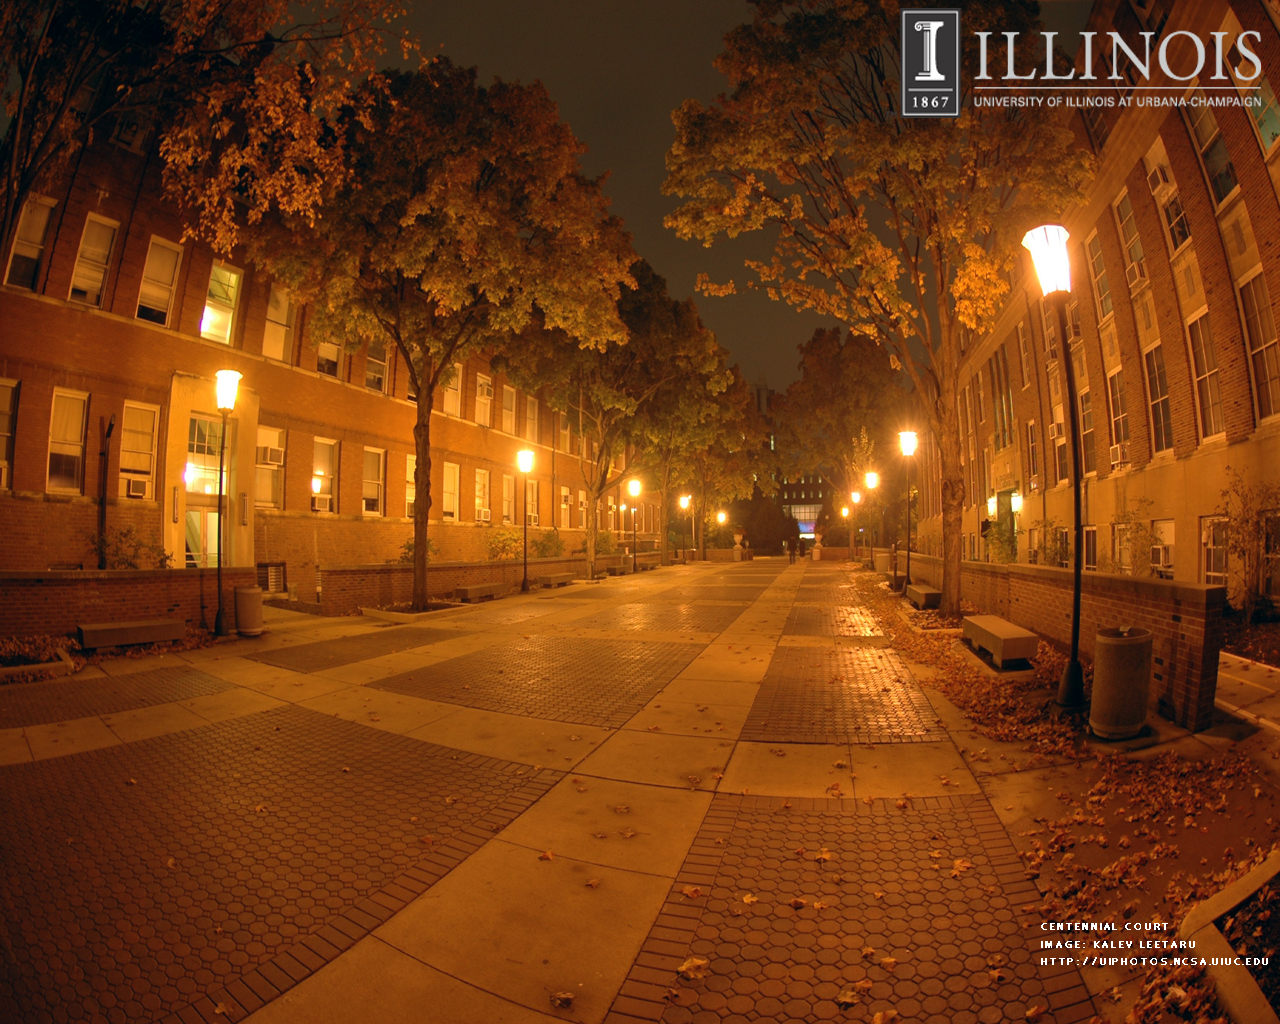 Project A Photographic Record Of The University Illinois